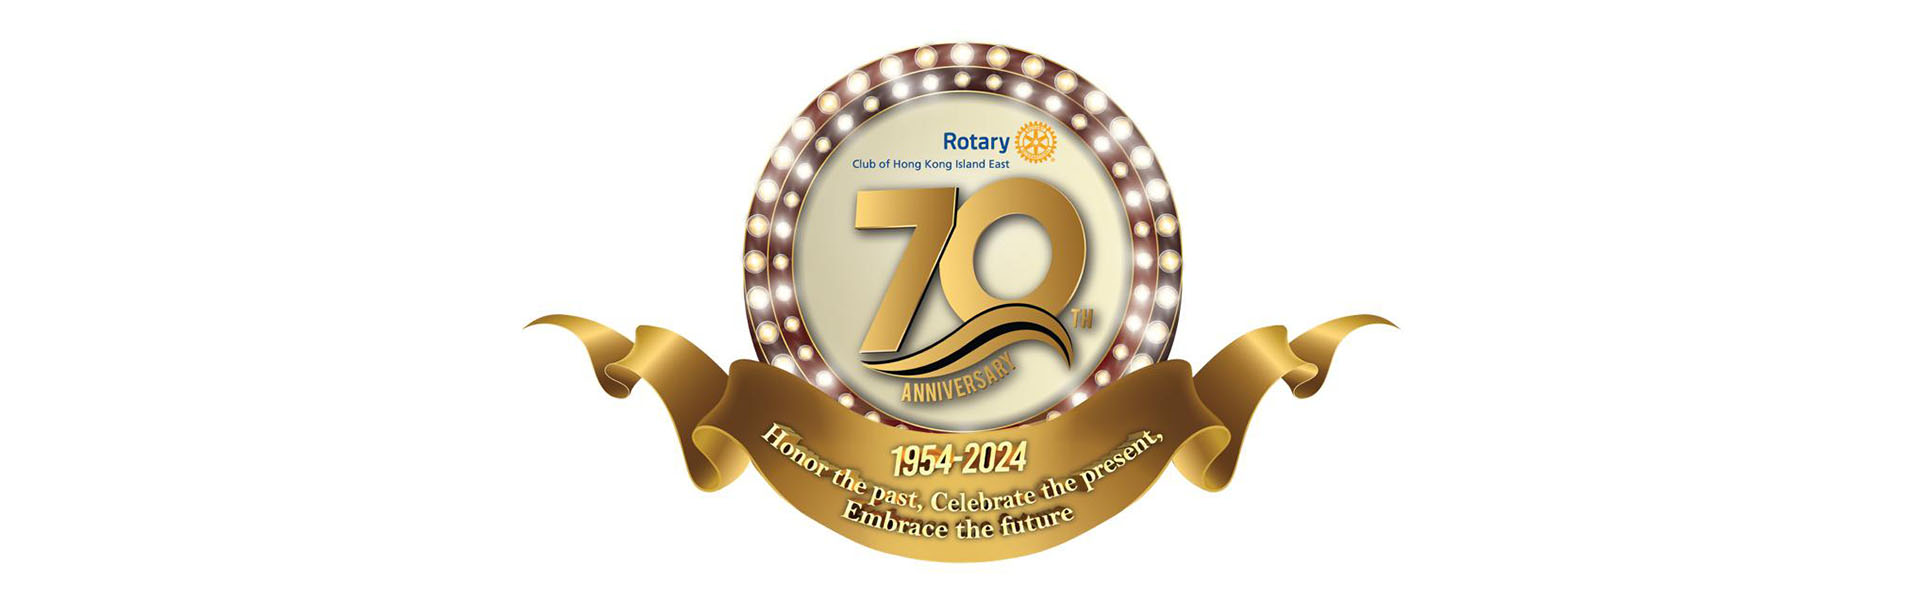 Anniversary celebration venues of Rotary Club of Hong Kong Island East from 1954-2024